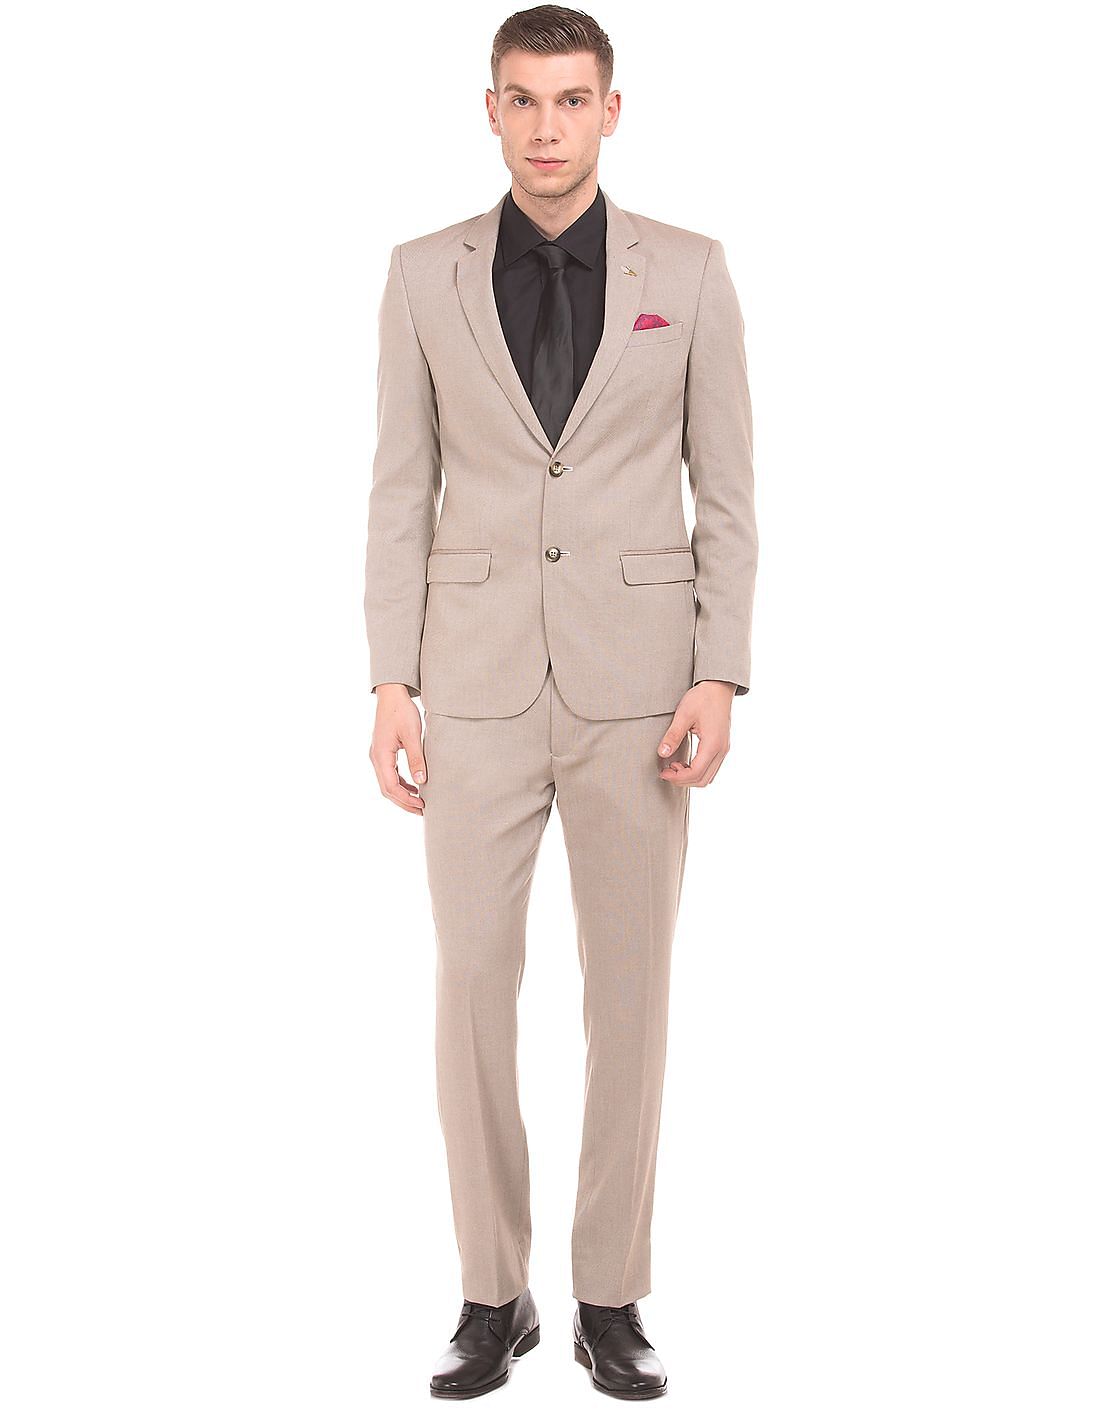 Buy Arrow Textured Two Piece Suit - NNNOW.com